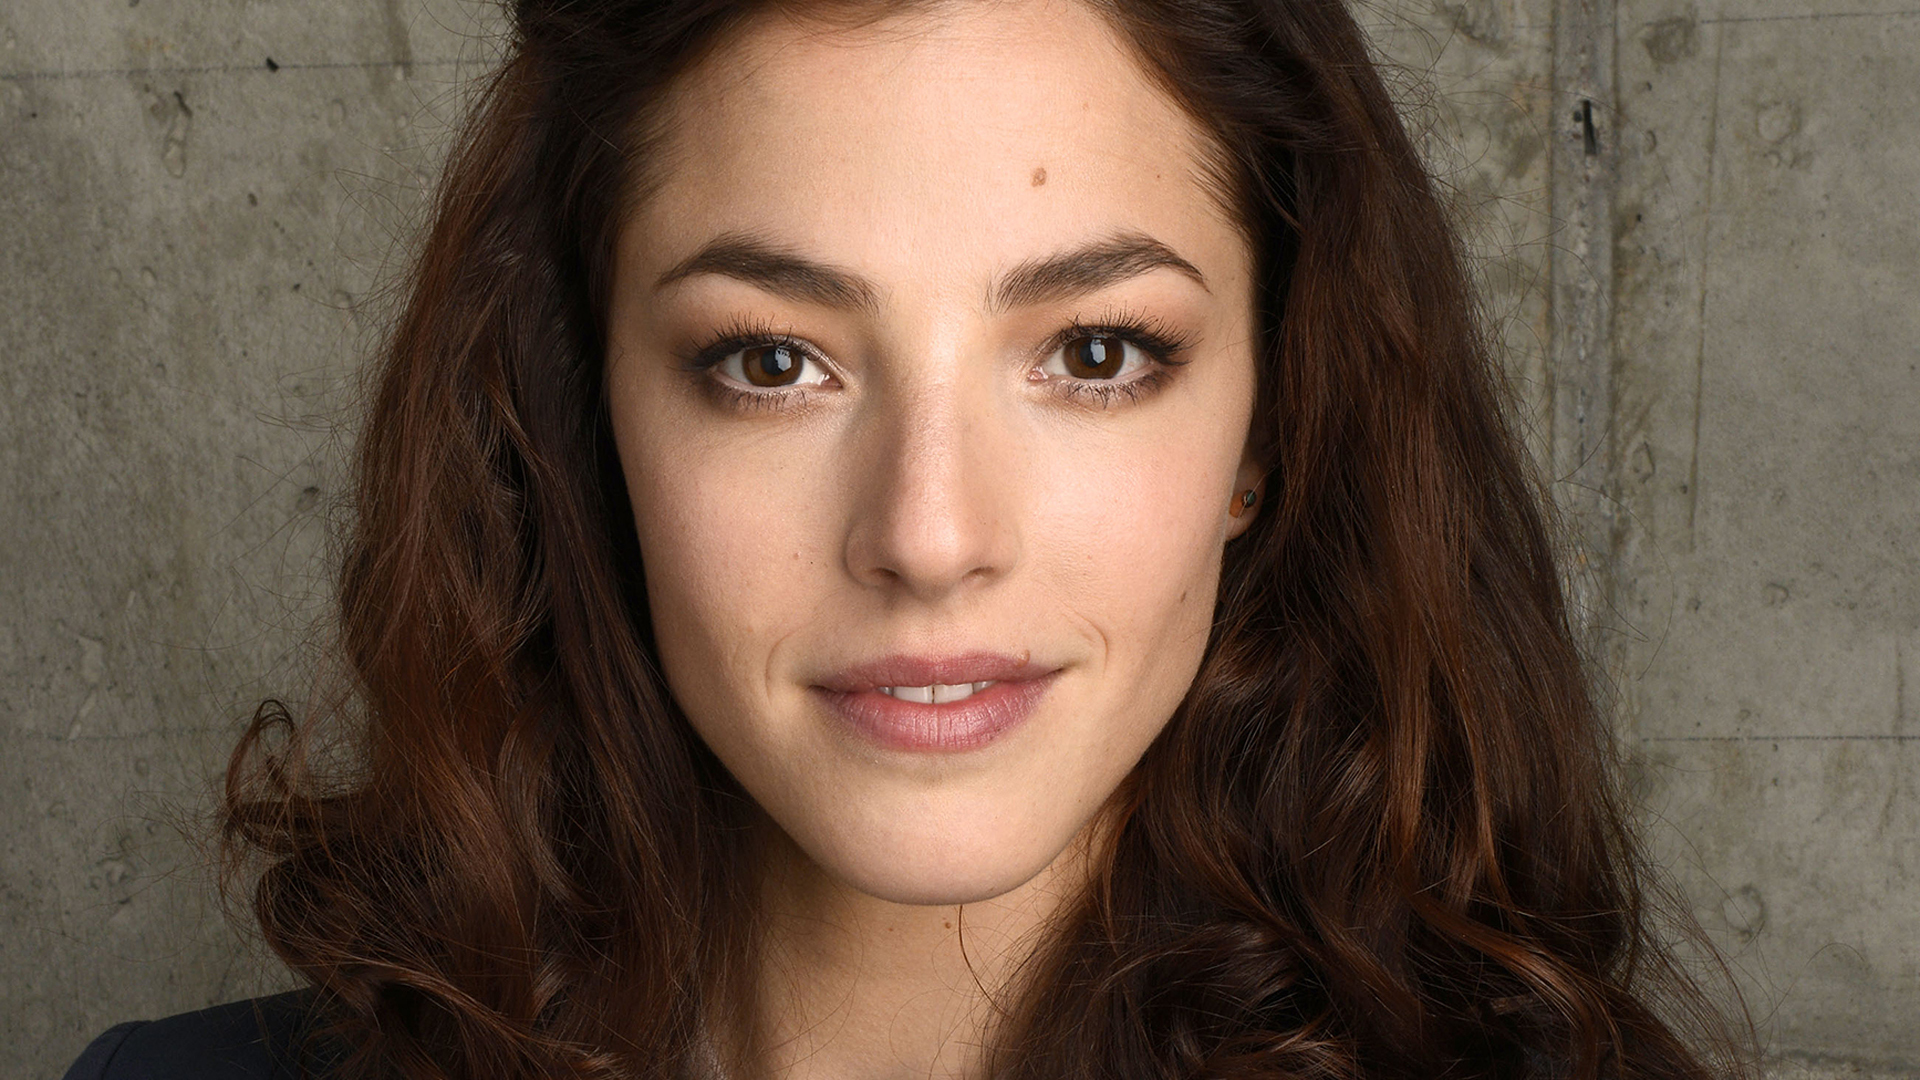 Free Download Olivia Thirlby Images on our website with great care. 